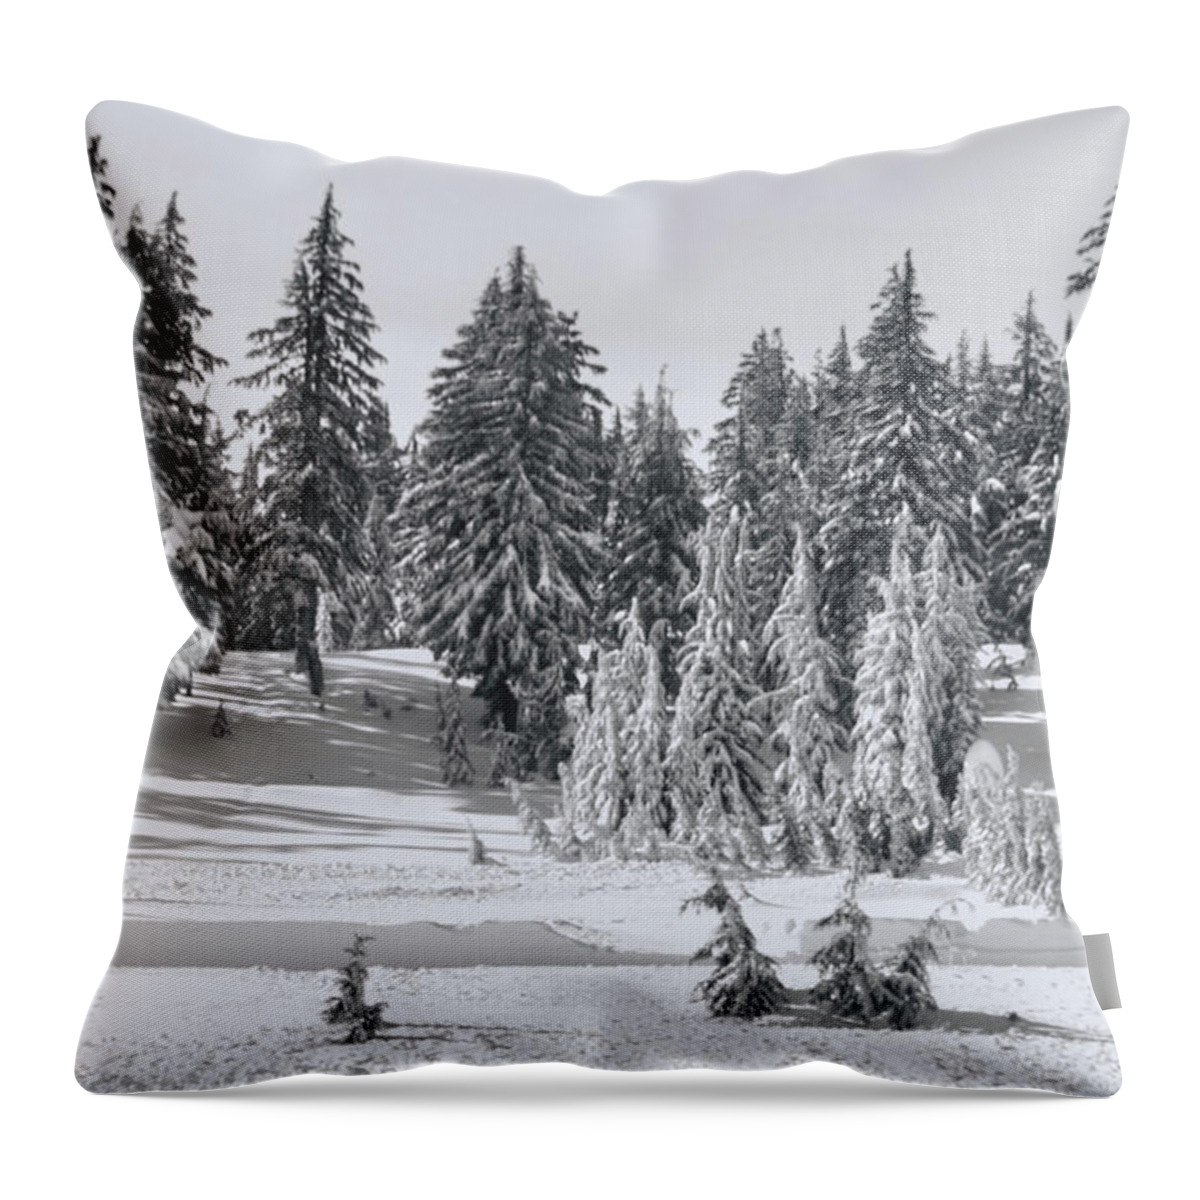 Black And White Pines Throw Pillow featuring the photograph Snow Pines Black and White by Cathy Anderson